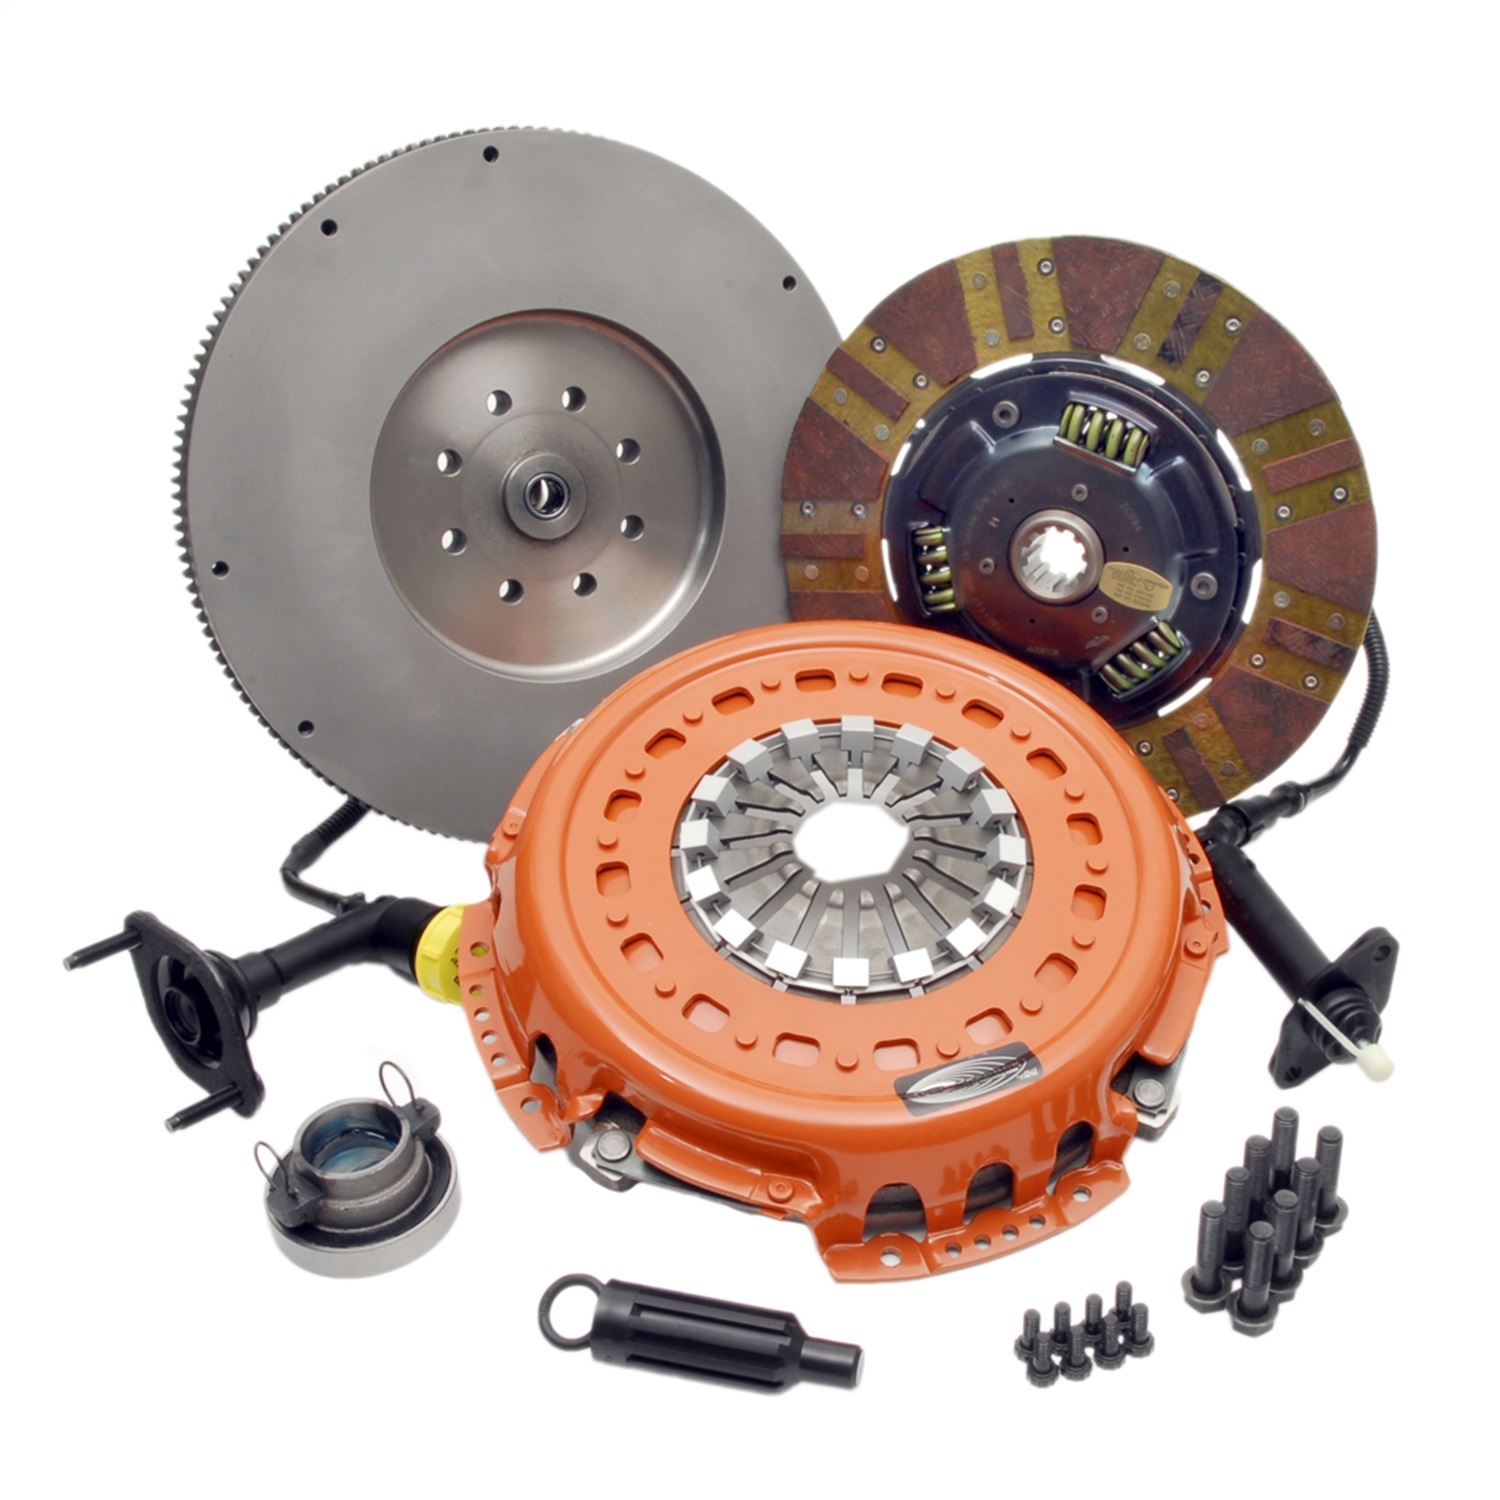 Centerforce Centerforce DF352341 Dual Friction Clutch Pressure Plate And Disc Set